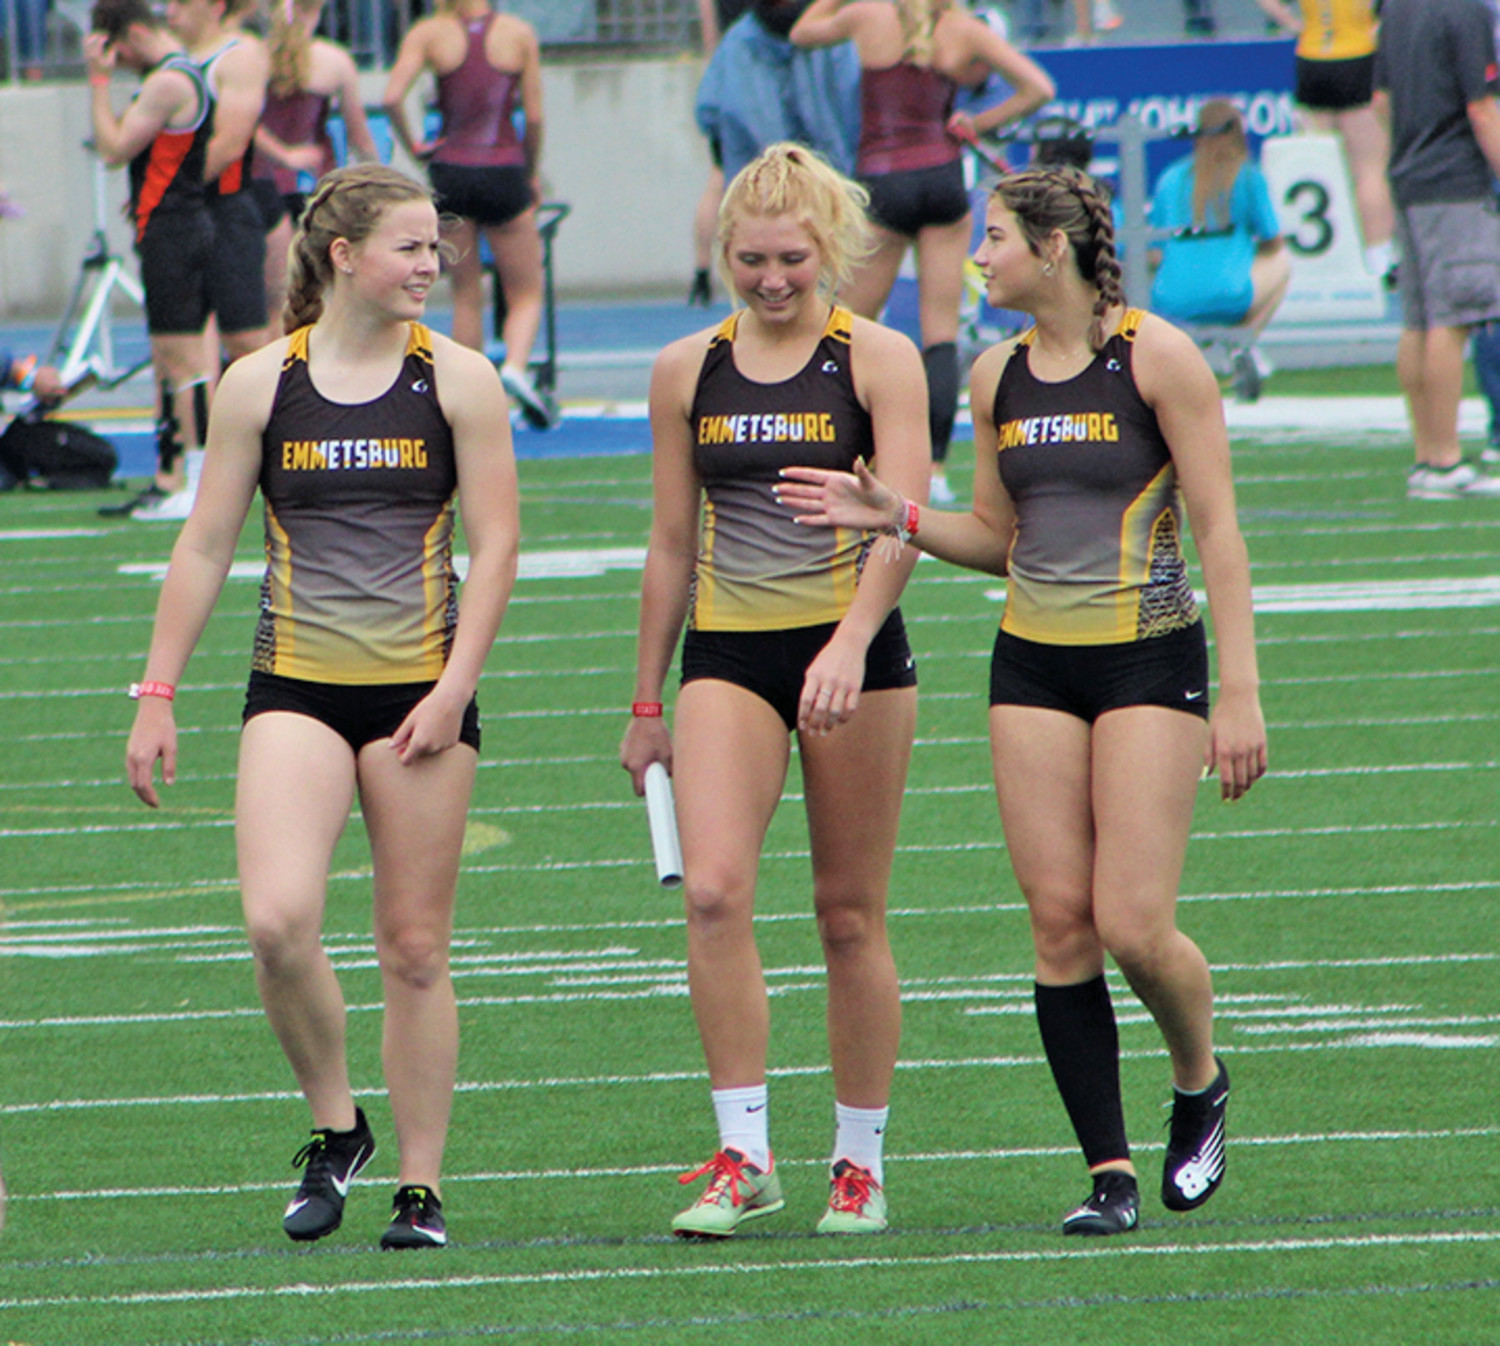 2021 STATE TRACK -- The 2021 State Track & Field Championships were held Thursday through Saturday at Drake Stadium in Des Moines. Area schools would send multiple events to the Blue Oval, with Emmetsburg earning nine bids. Above (from left), Abbie Schany, Taylor Steinkamp, and Delaney Joyce in Des Moines. Results coming Thursday.